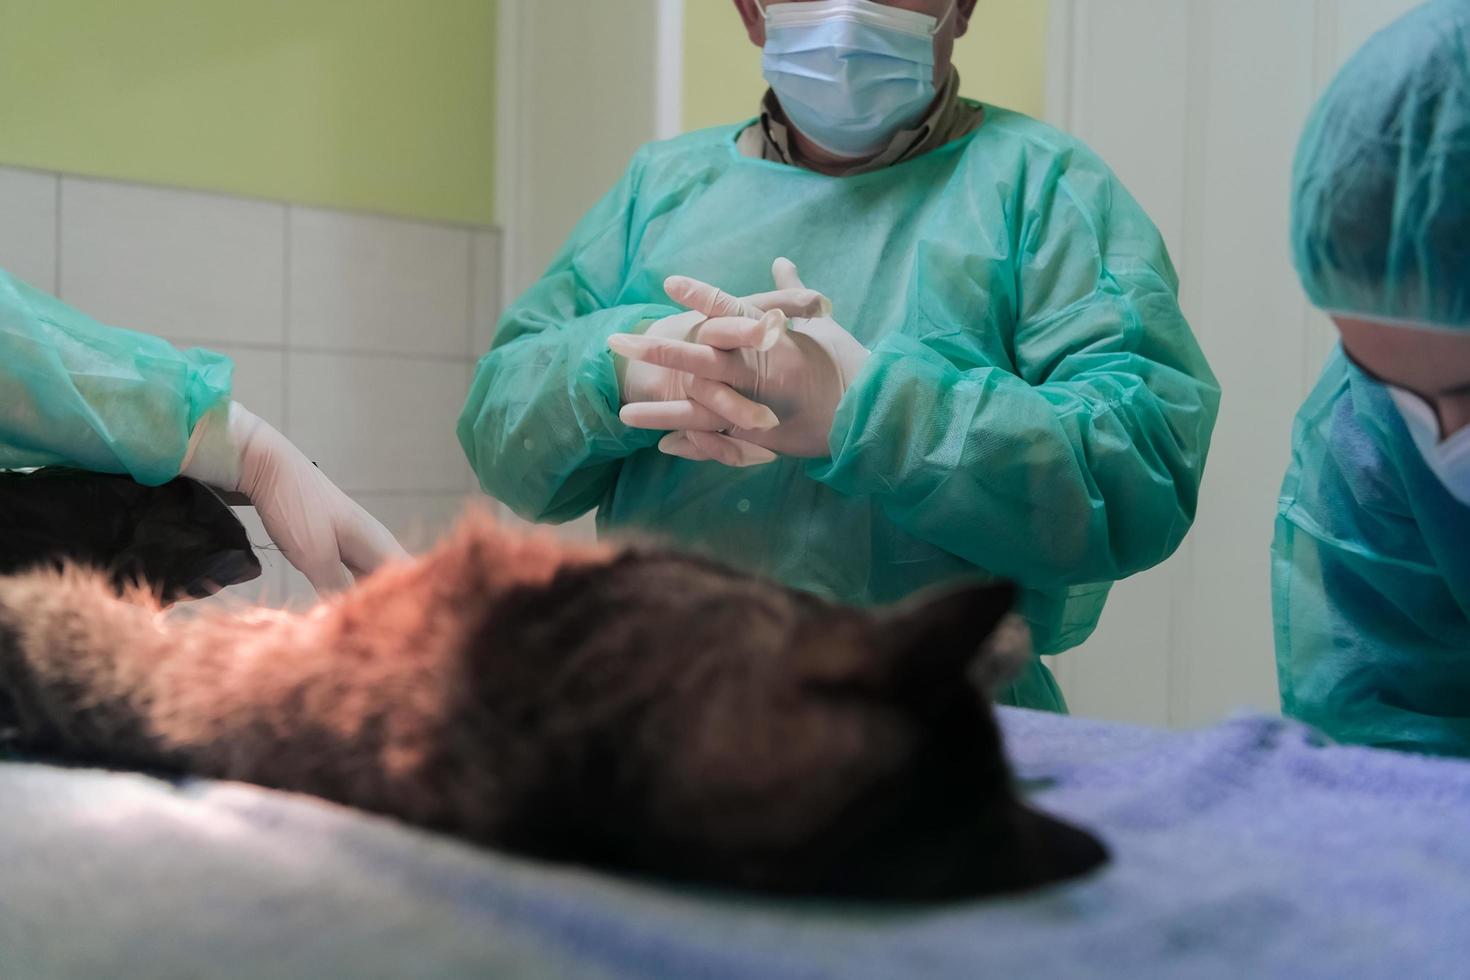 Real abdominal surgery on a cat in a hospital setting photo